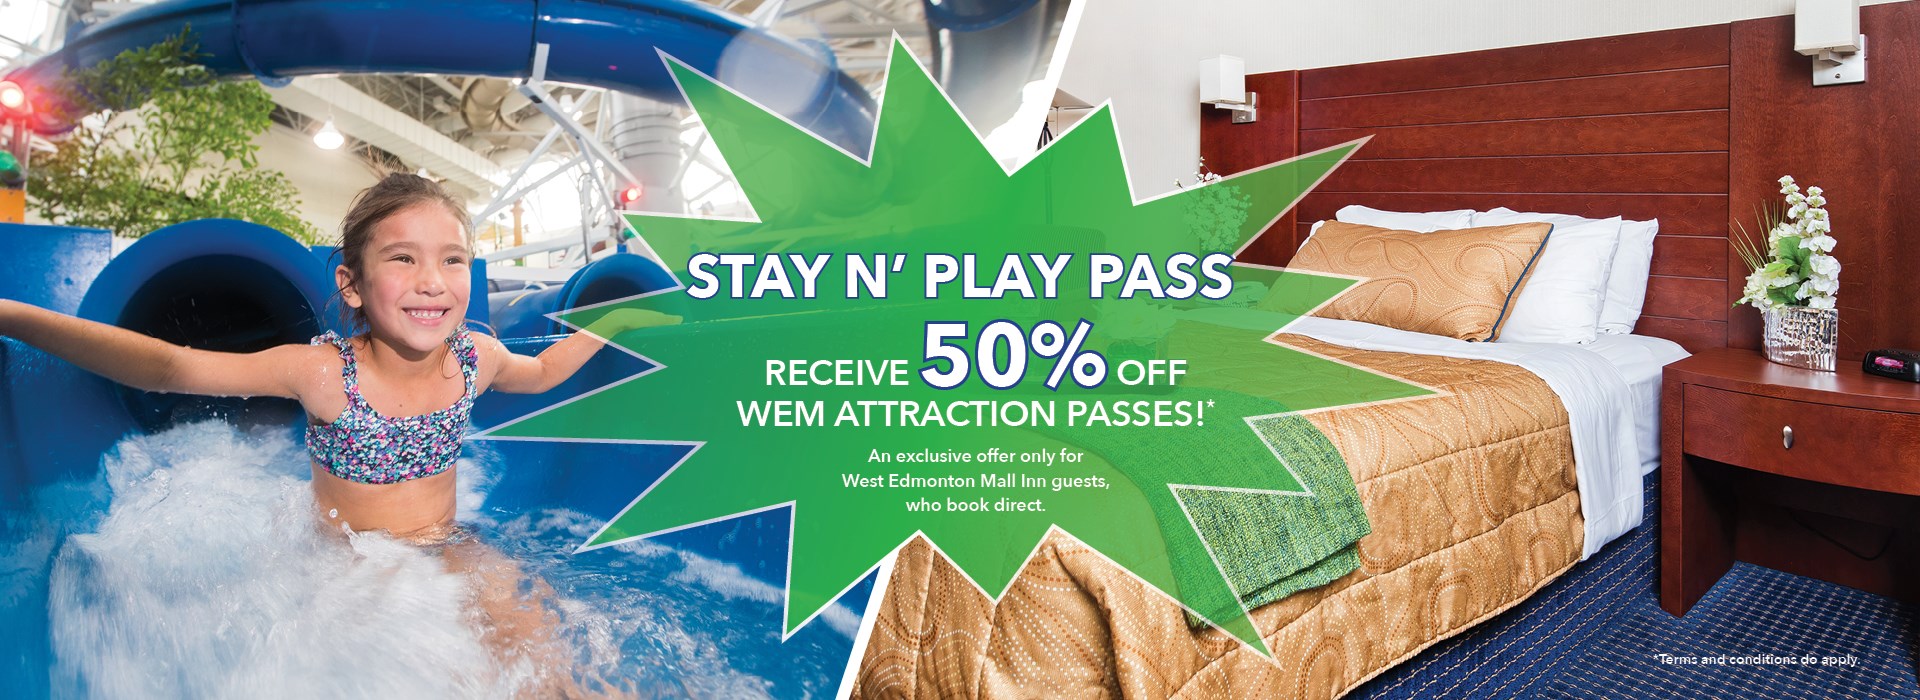 Stay n' Play Pass